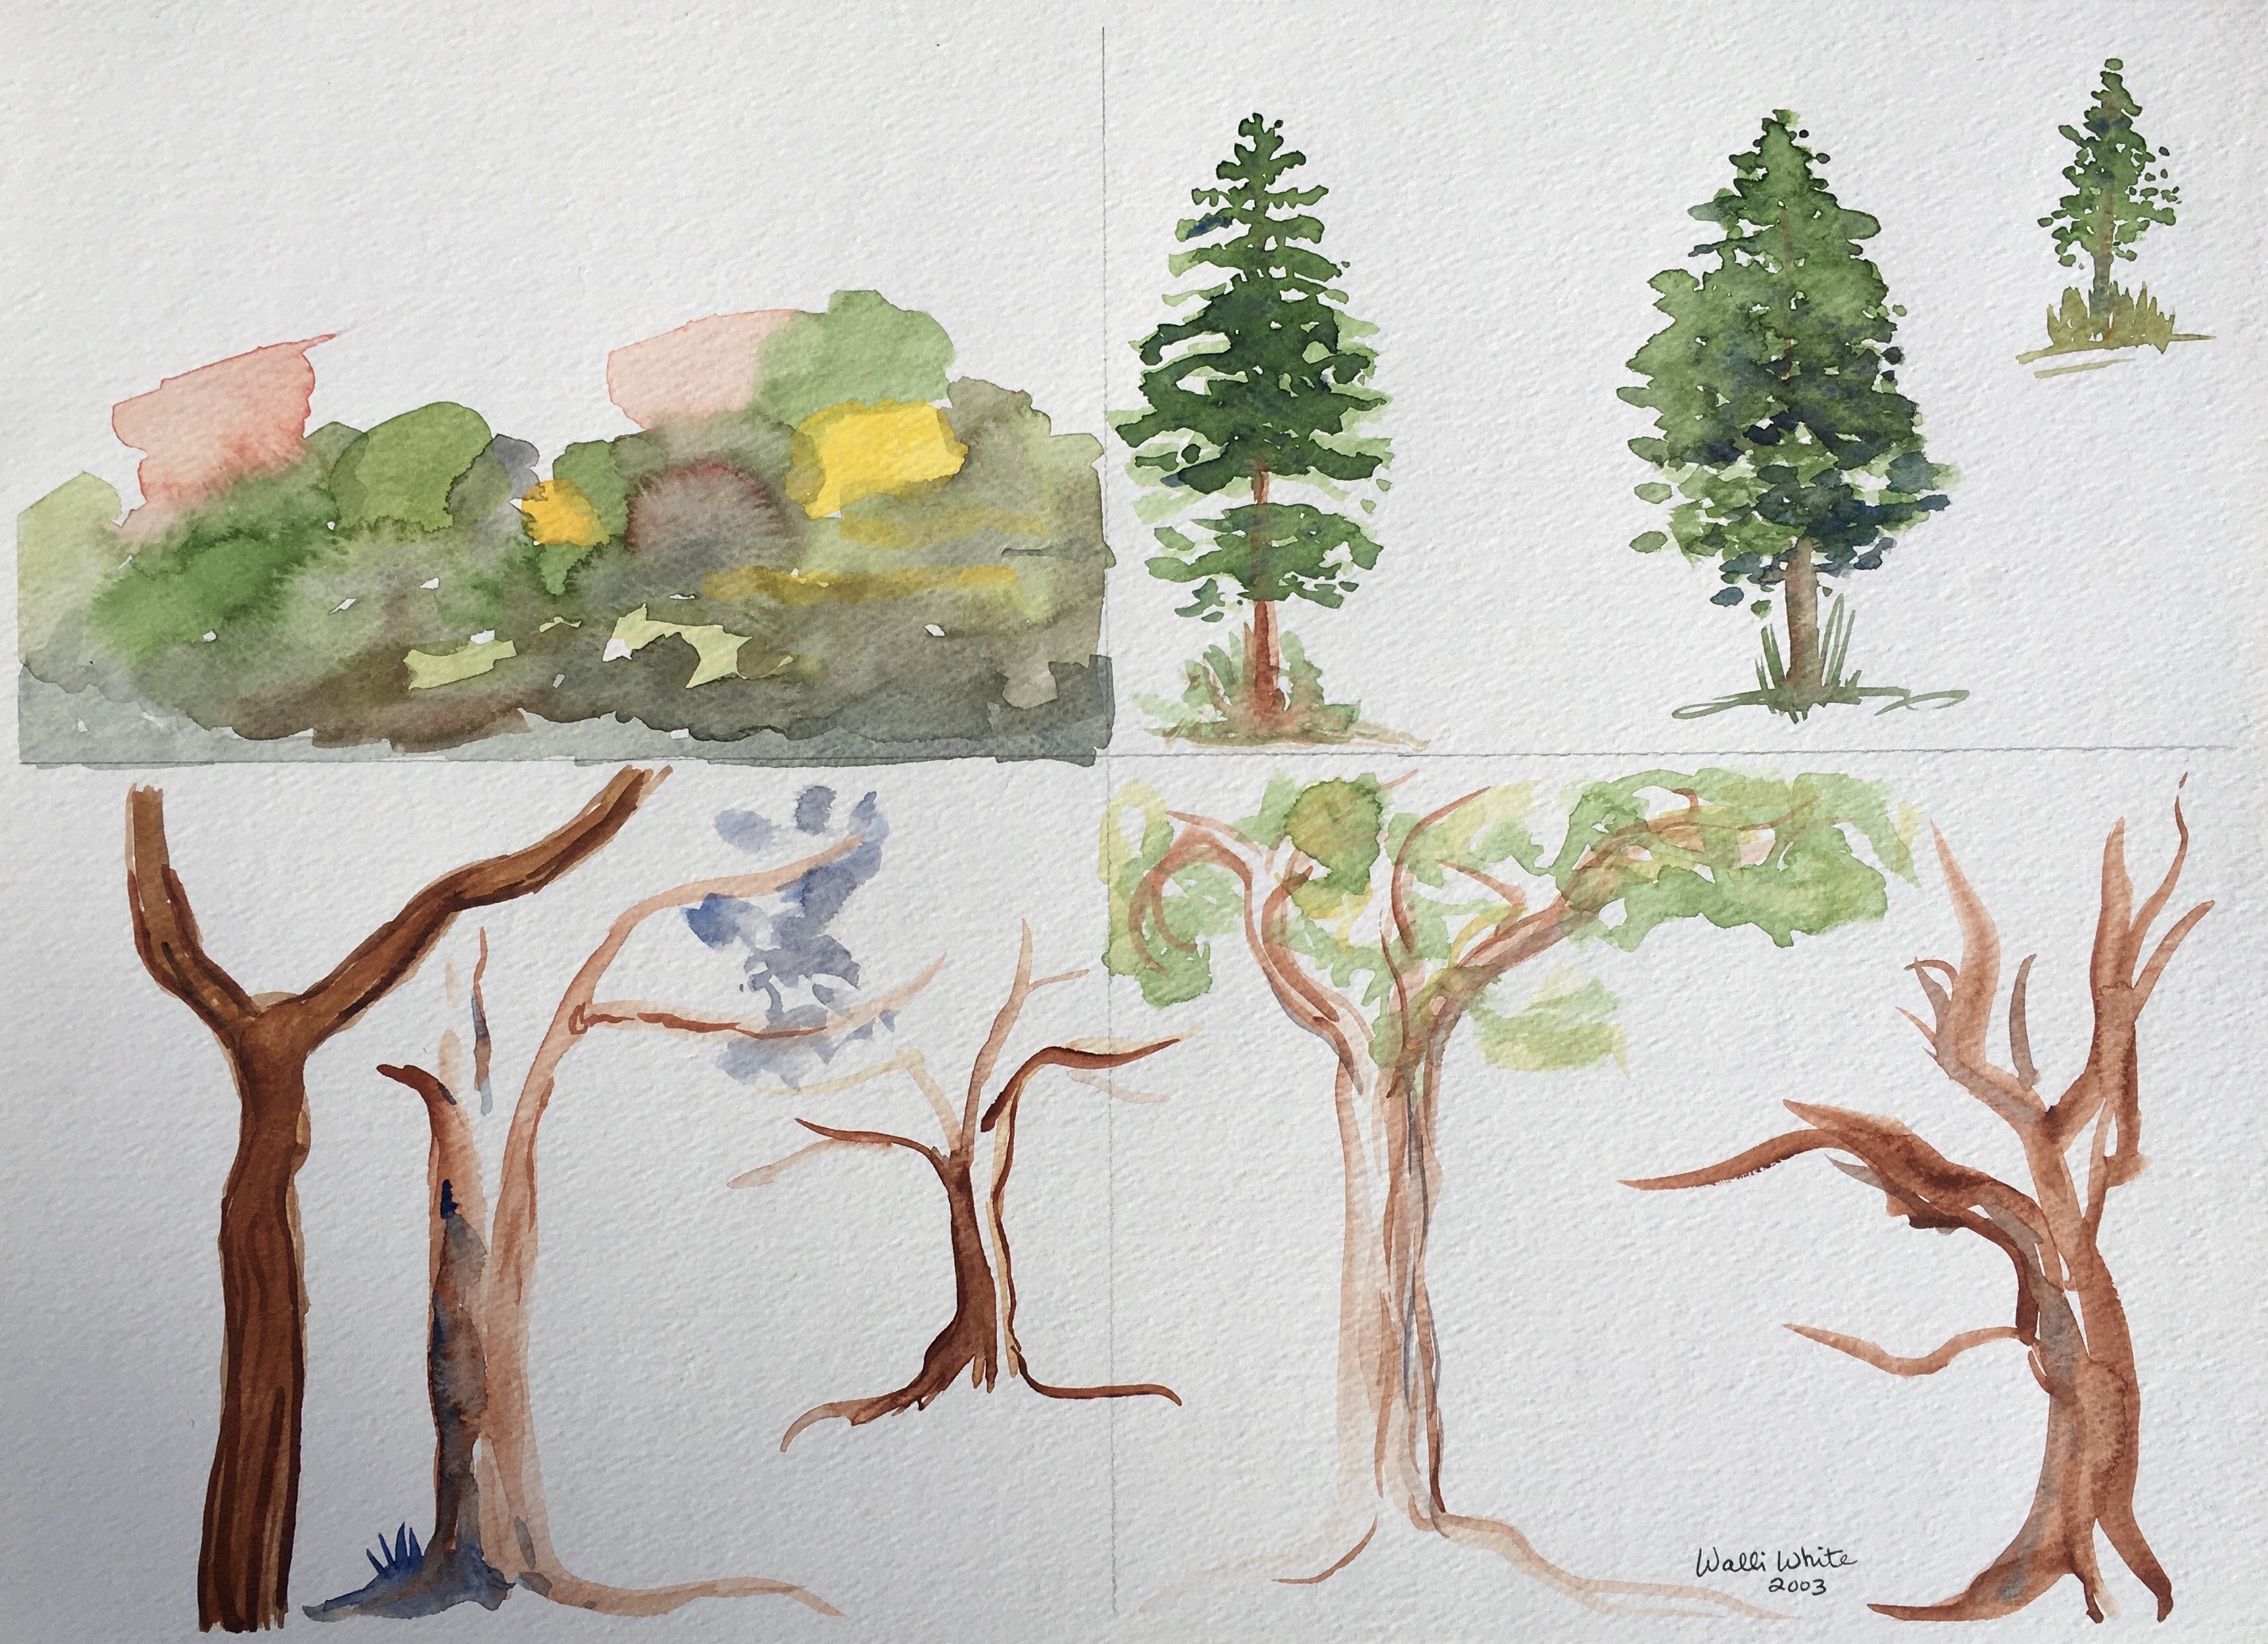 Exercise With Trees #1, 2003
Watercolor on Paper
15"W x 11"H, Walli White, artist